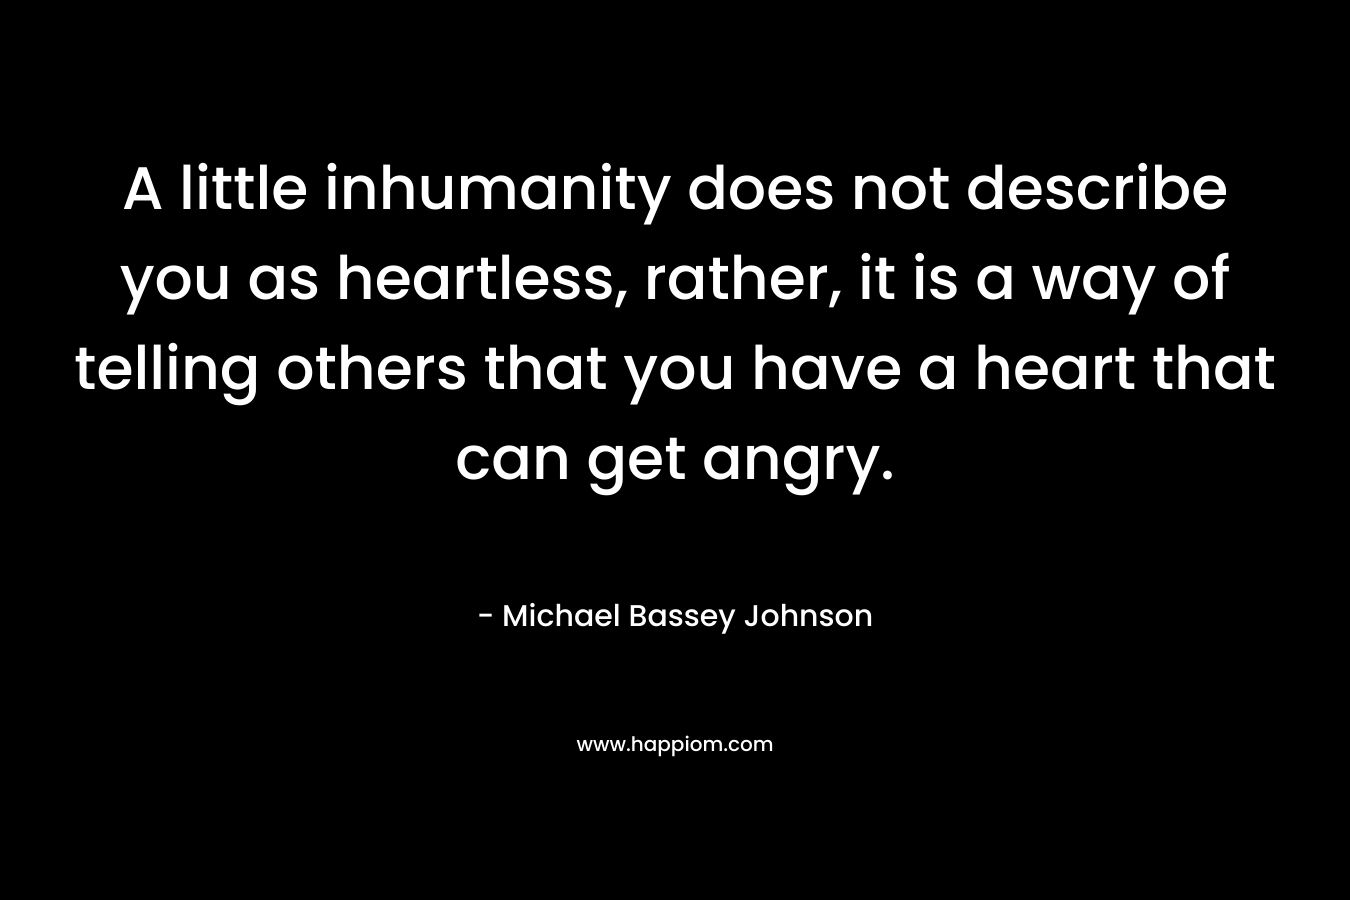 A little inhumanity does not describe you as heartless, rather, it is a way of telling others that you have a heart that can get angry. – Michael Bassey Johnson